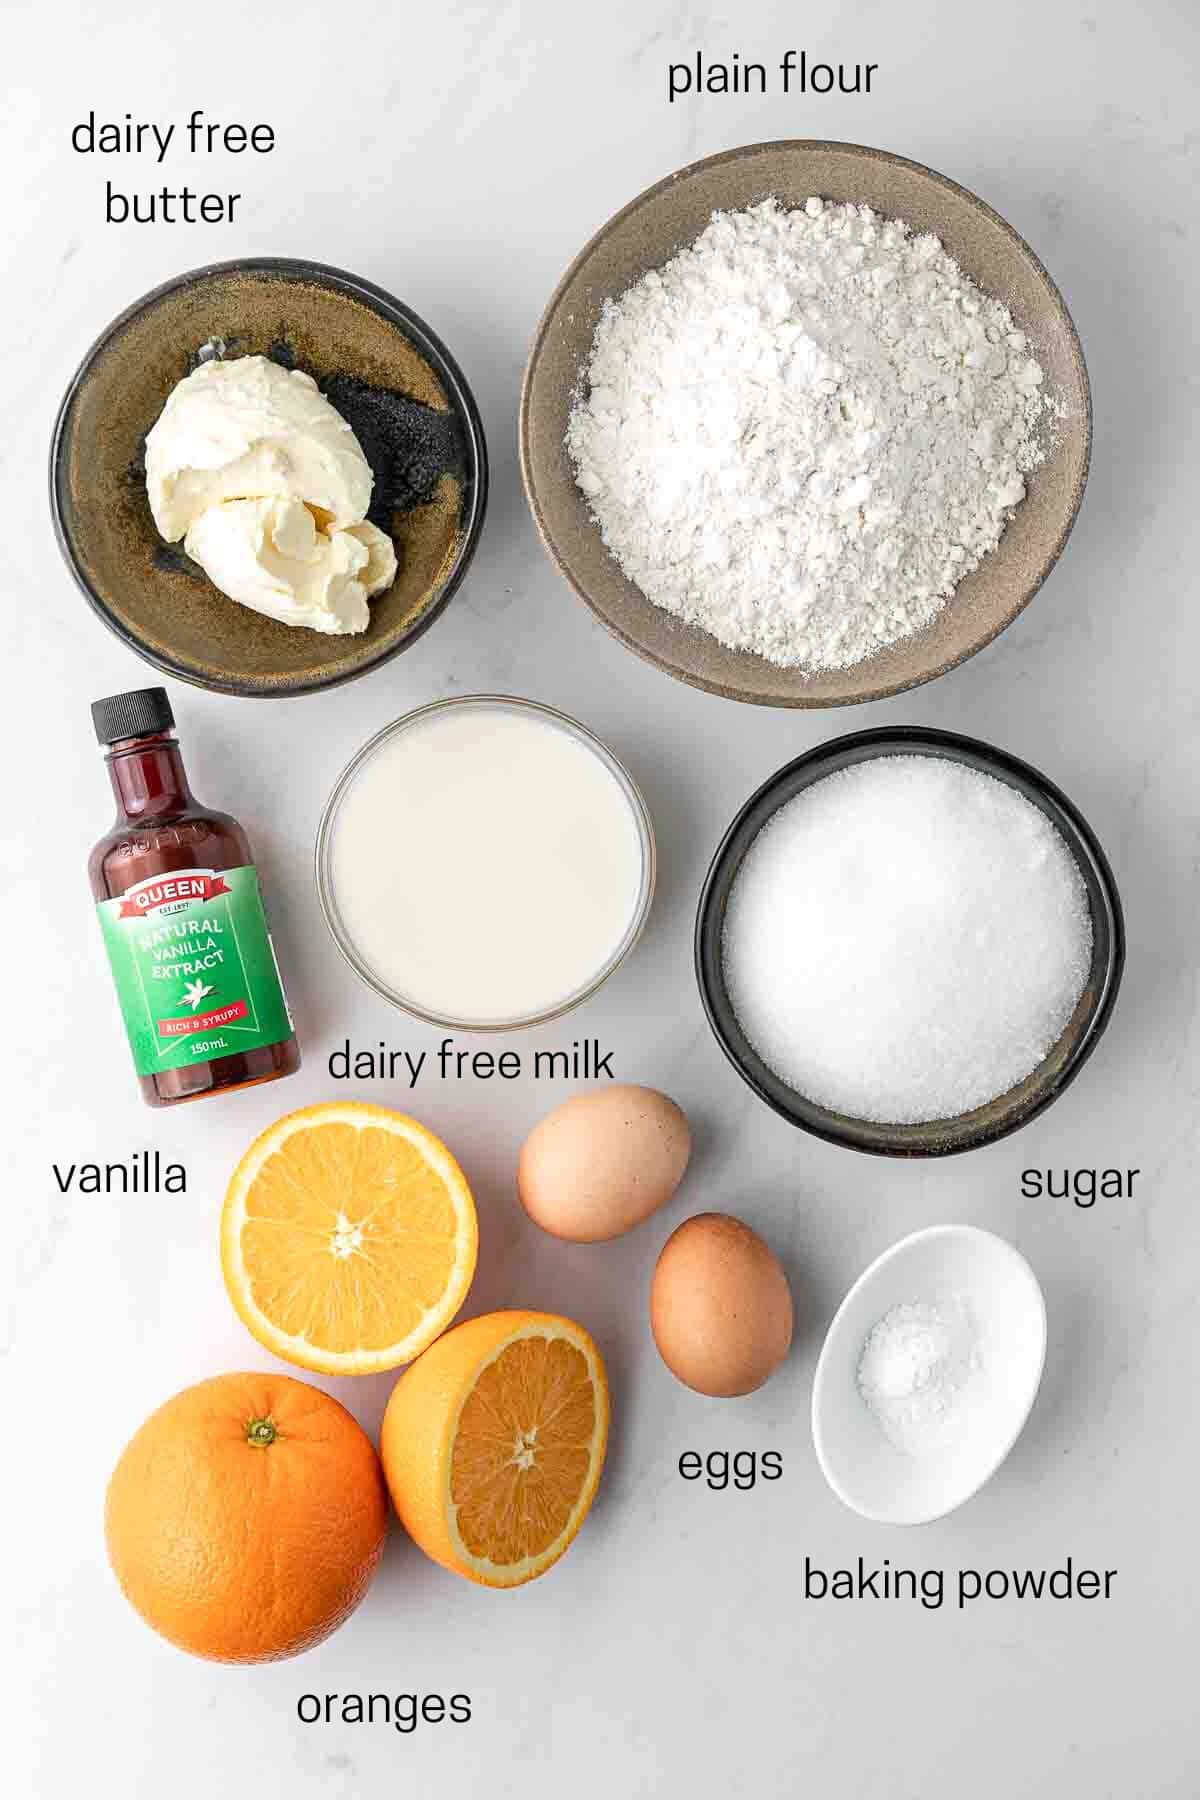 All ingredients needed for orange pound cake laid out in small bowls.